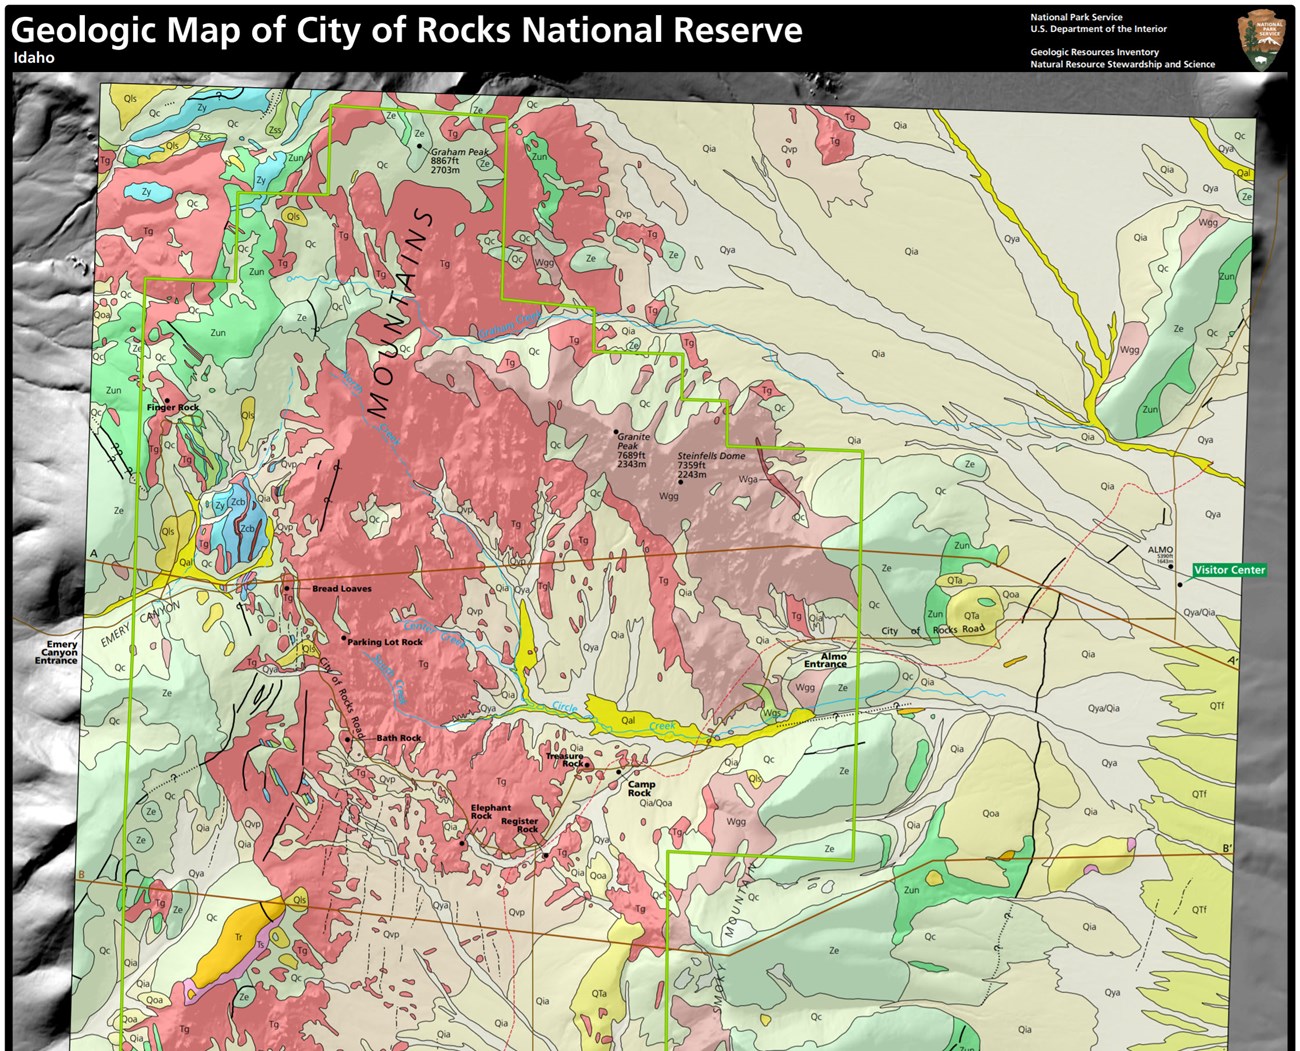 link to city of rocks geologic map